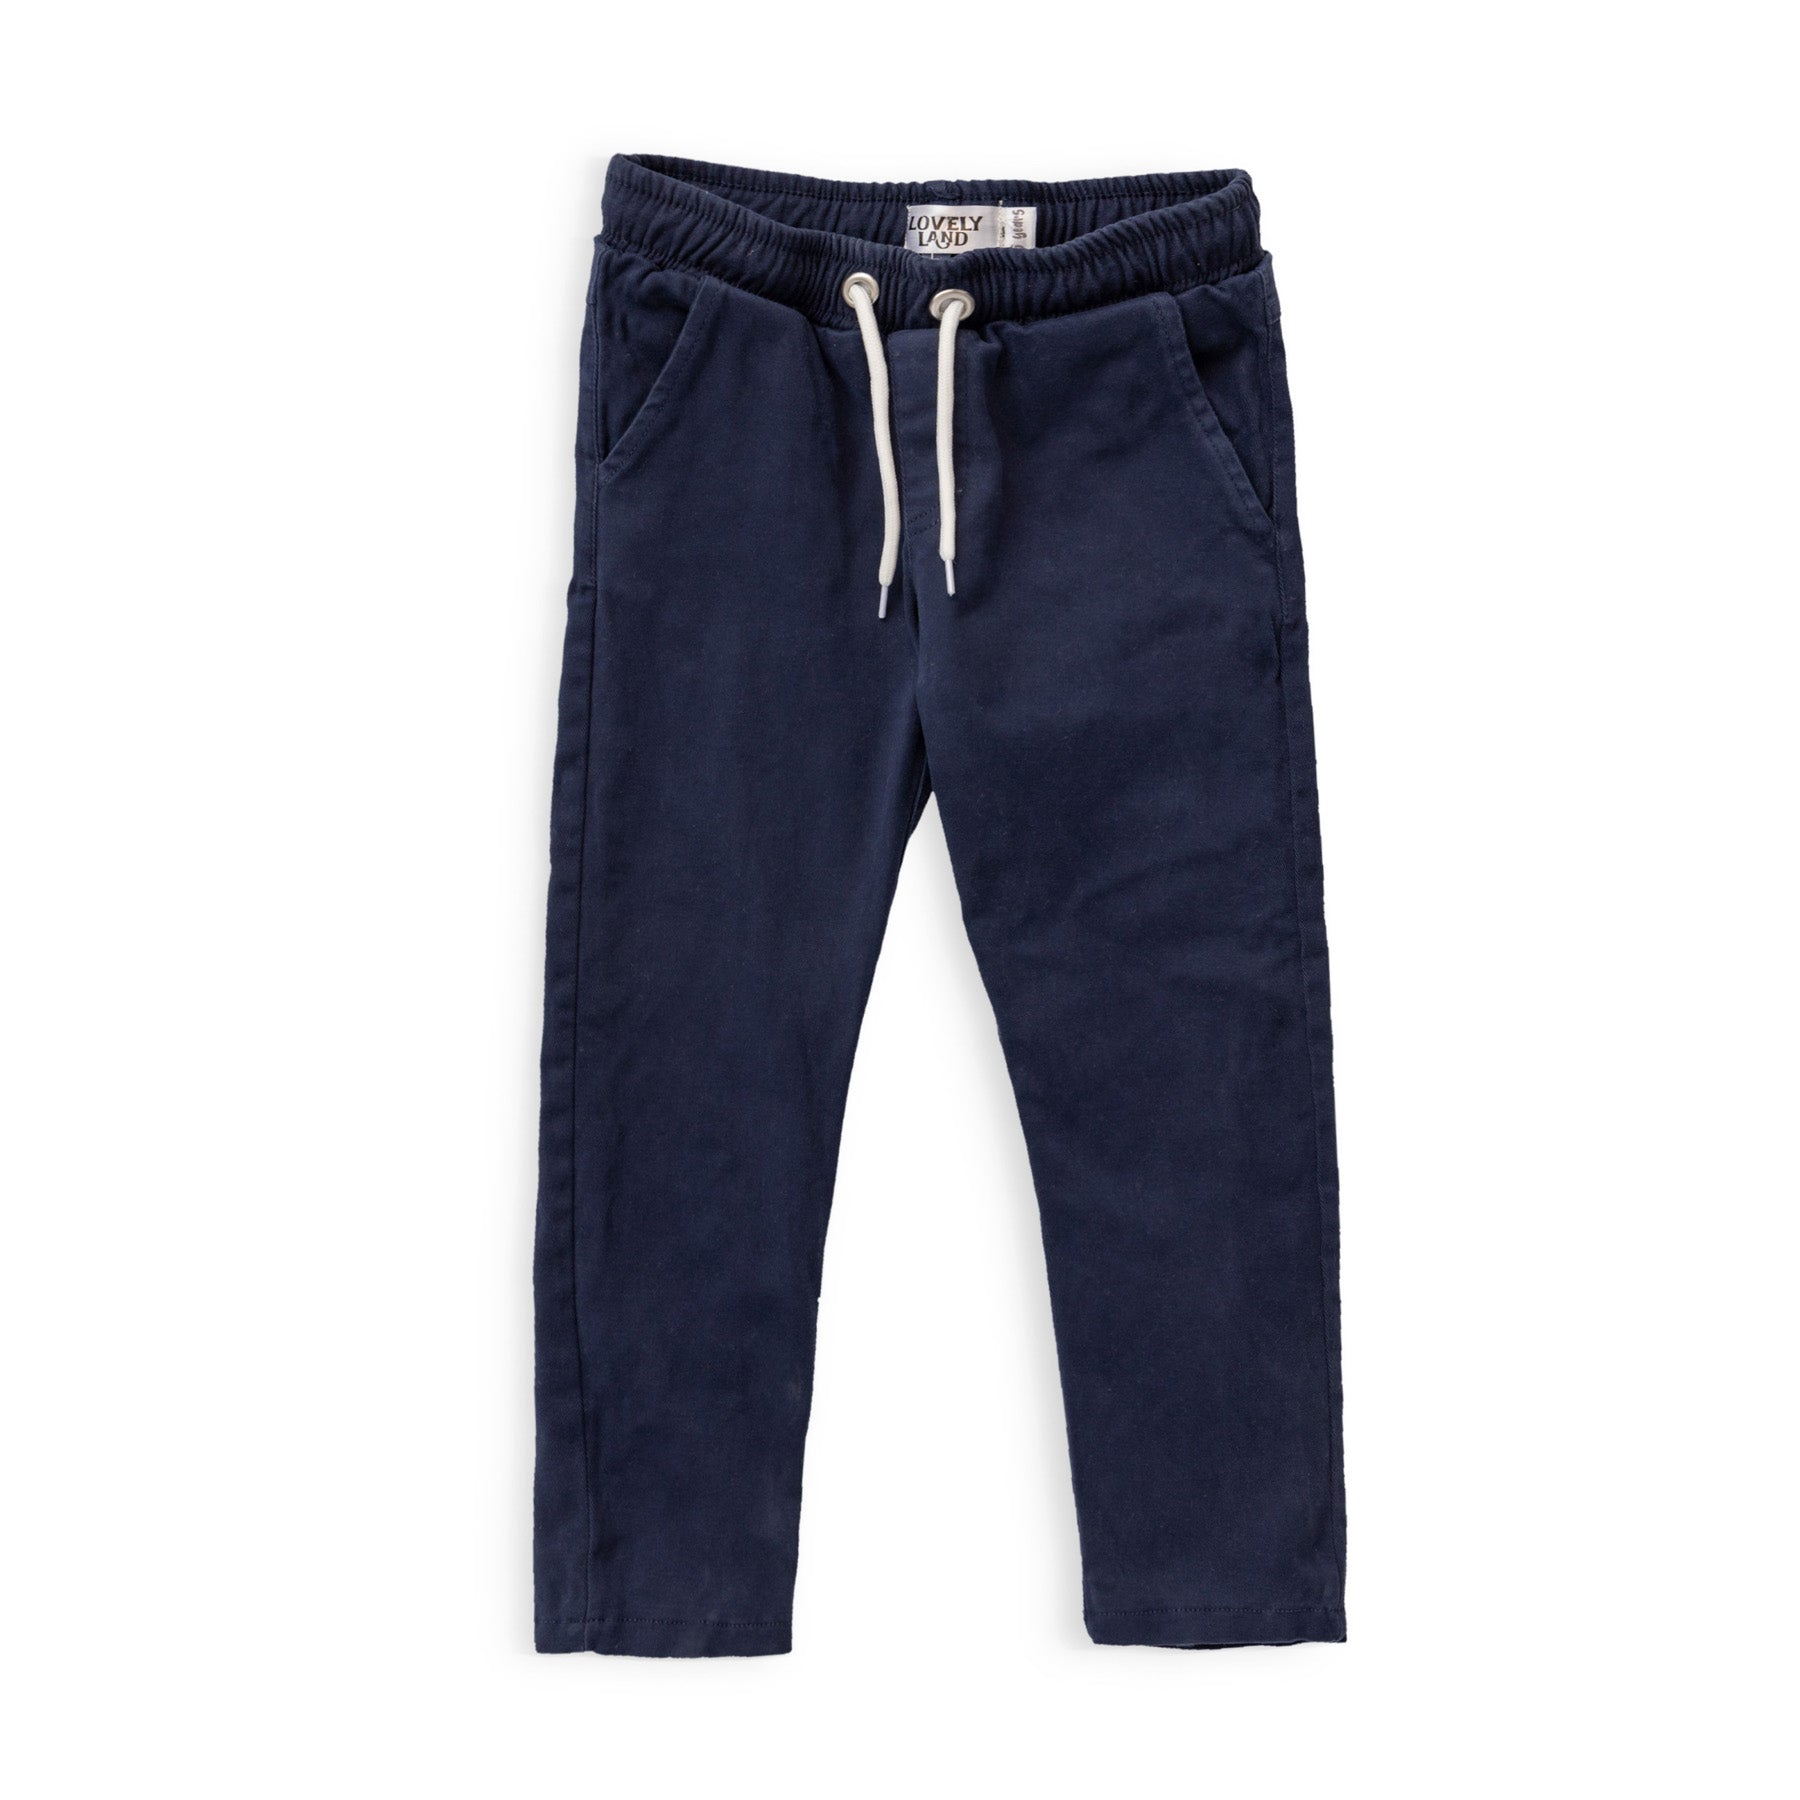 dark blue pants with laces